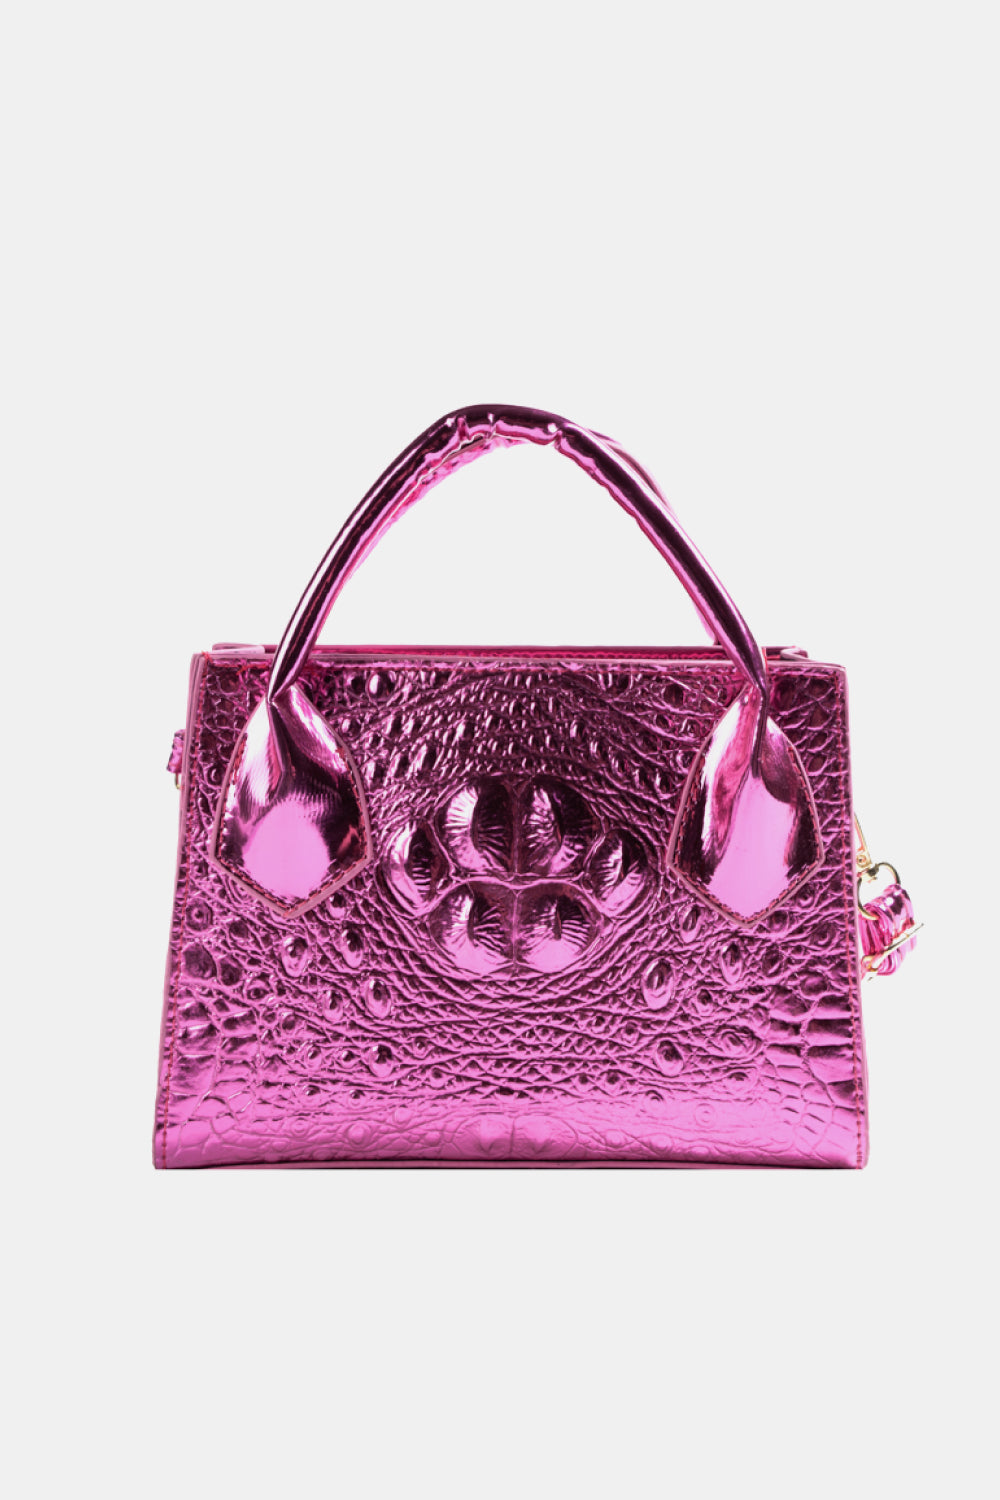 Hot Pink One Size - Textured PU Leather Crossbody Bag - handbag at TFC&H Co.